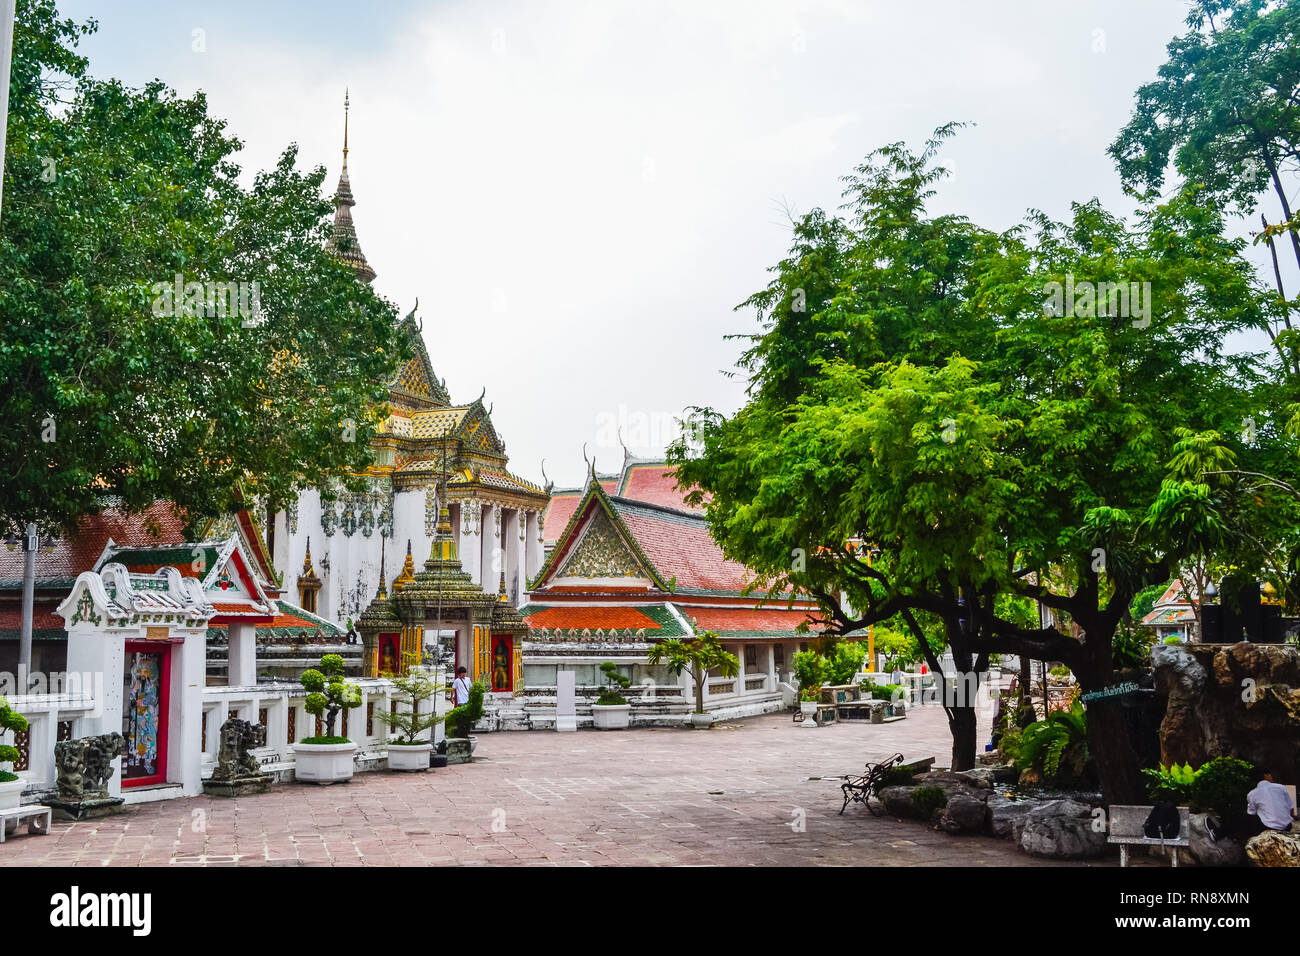 Thailand, Bangkok, Wat Pho is a Buddhist temple in Phra Nakhon district, Bangkok, Thailand. It is located in the Rattanakosin district directly adjace Stock Photo